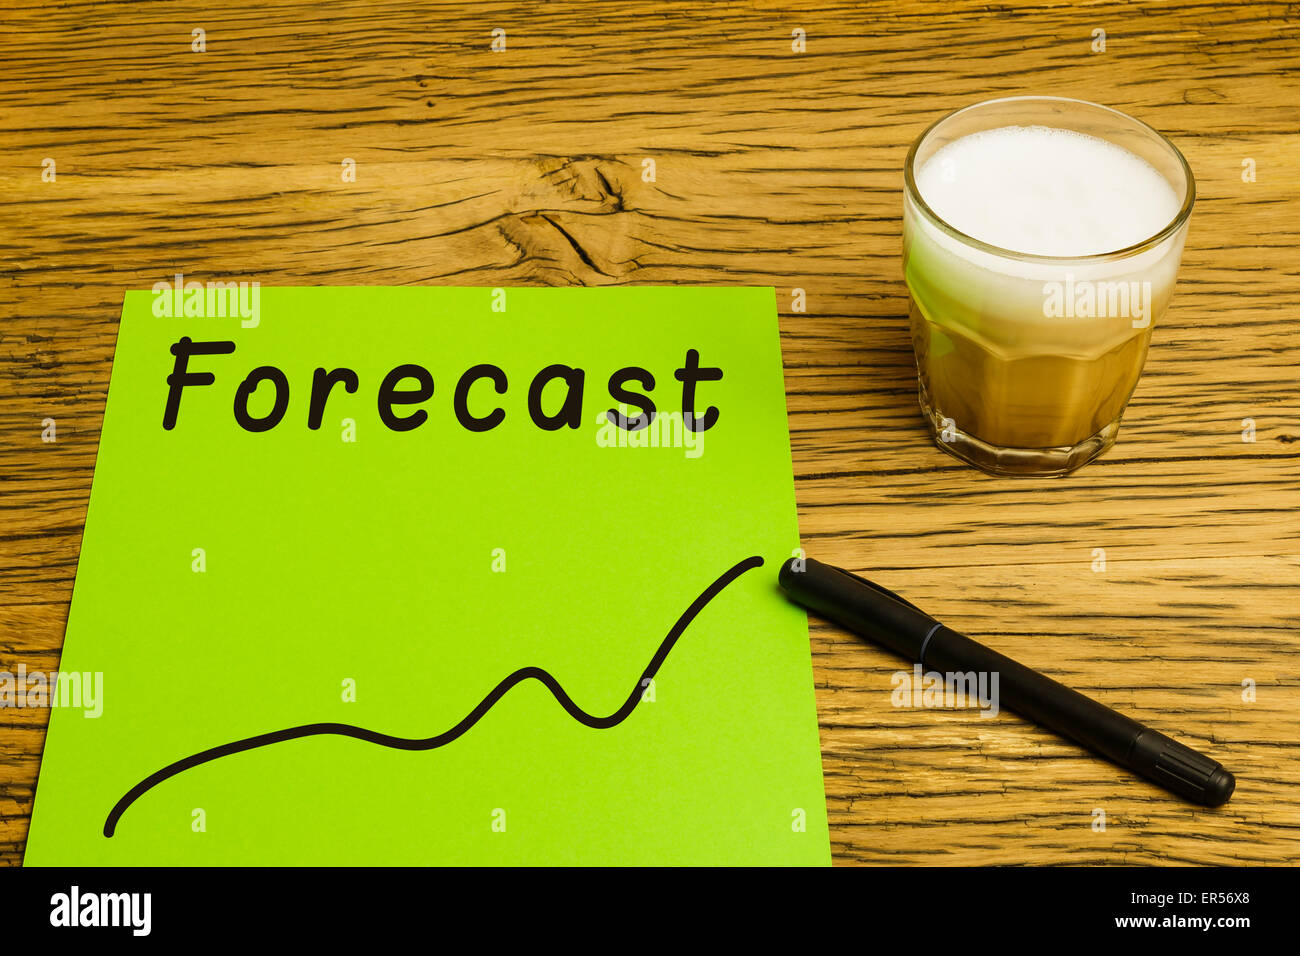 Forecast written on green paper with graph. Marker and coffee on desk. Stock Photo